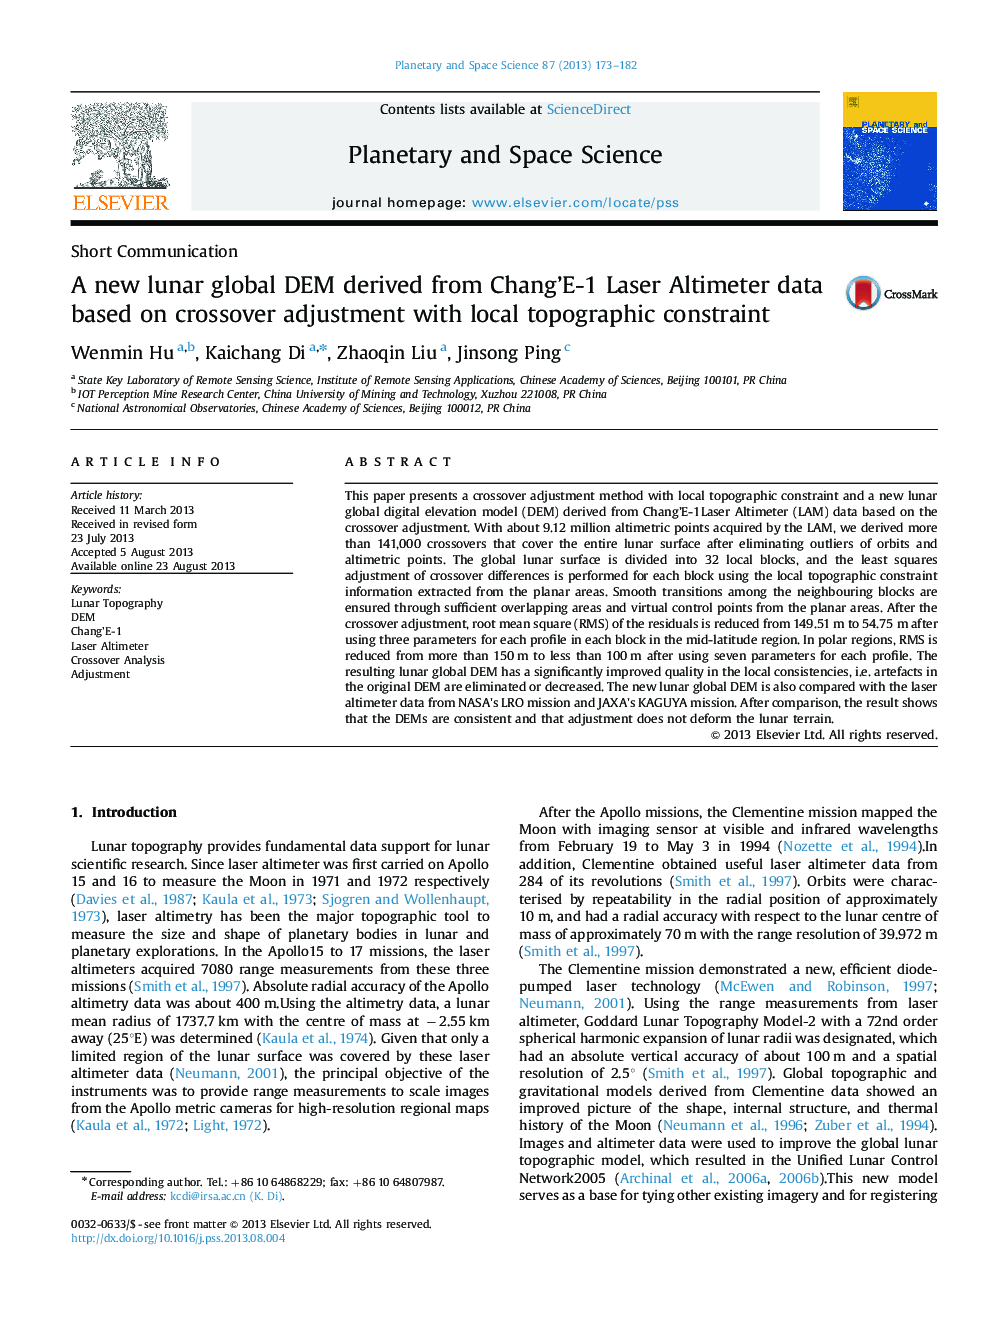 A new lunar global DEM derived from Chang’E-1 Laser Altimeter data based on crossover adjustment with local topographic constraint